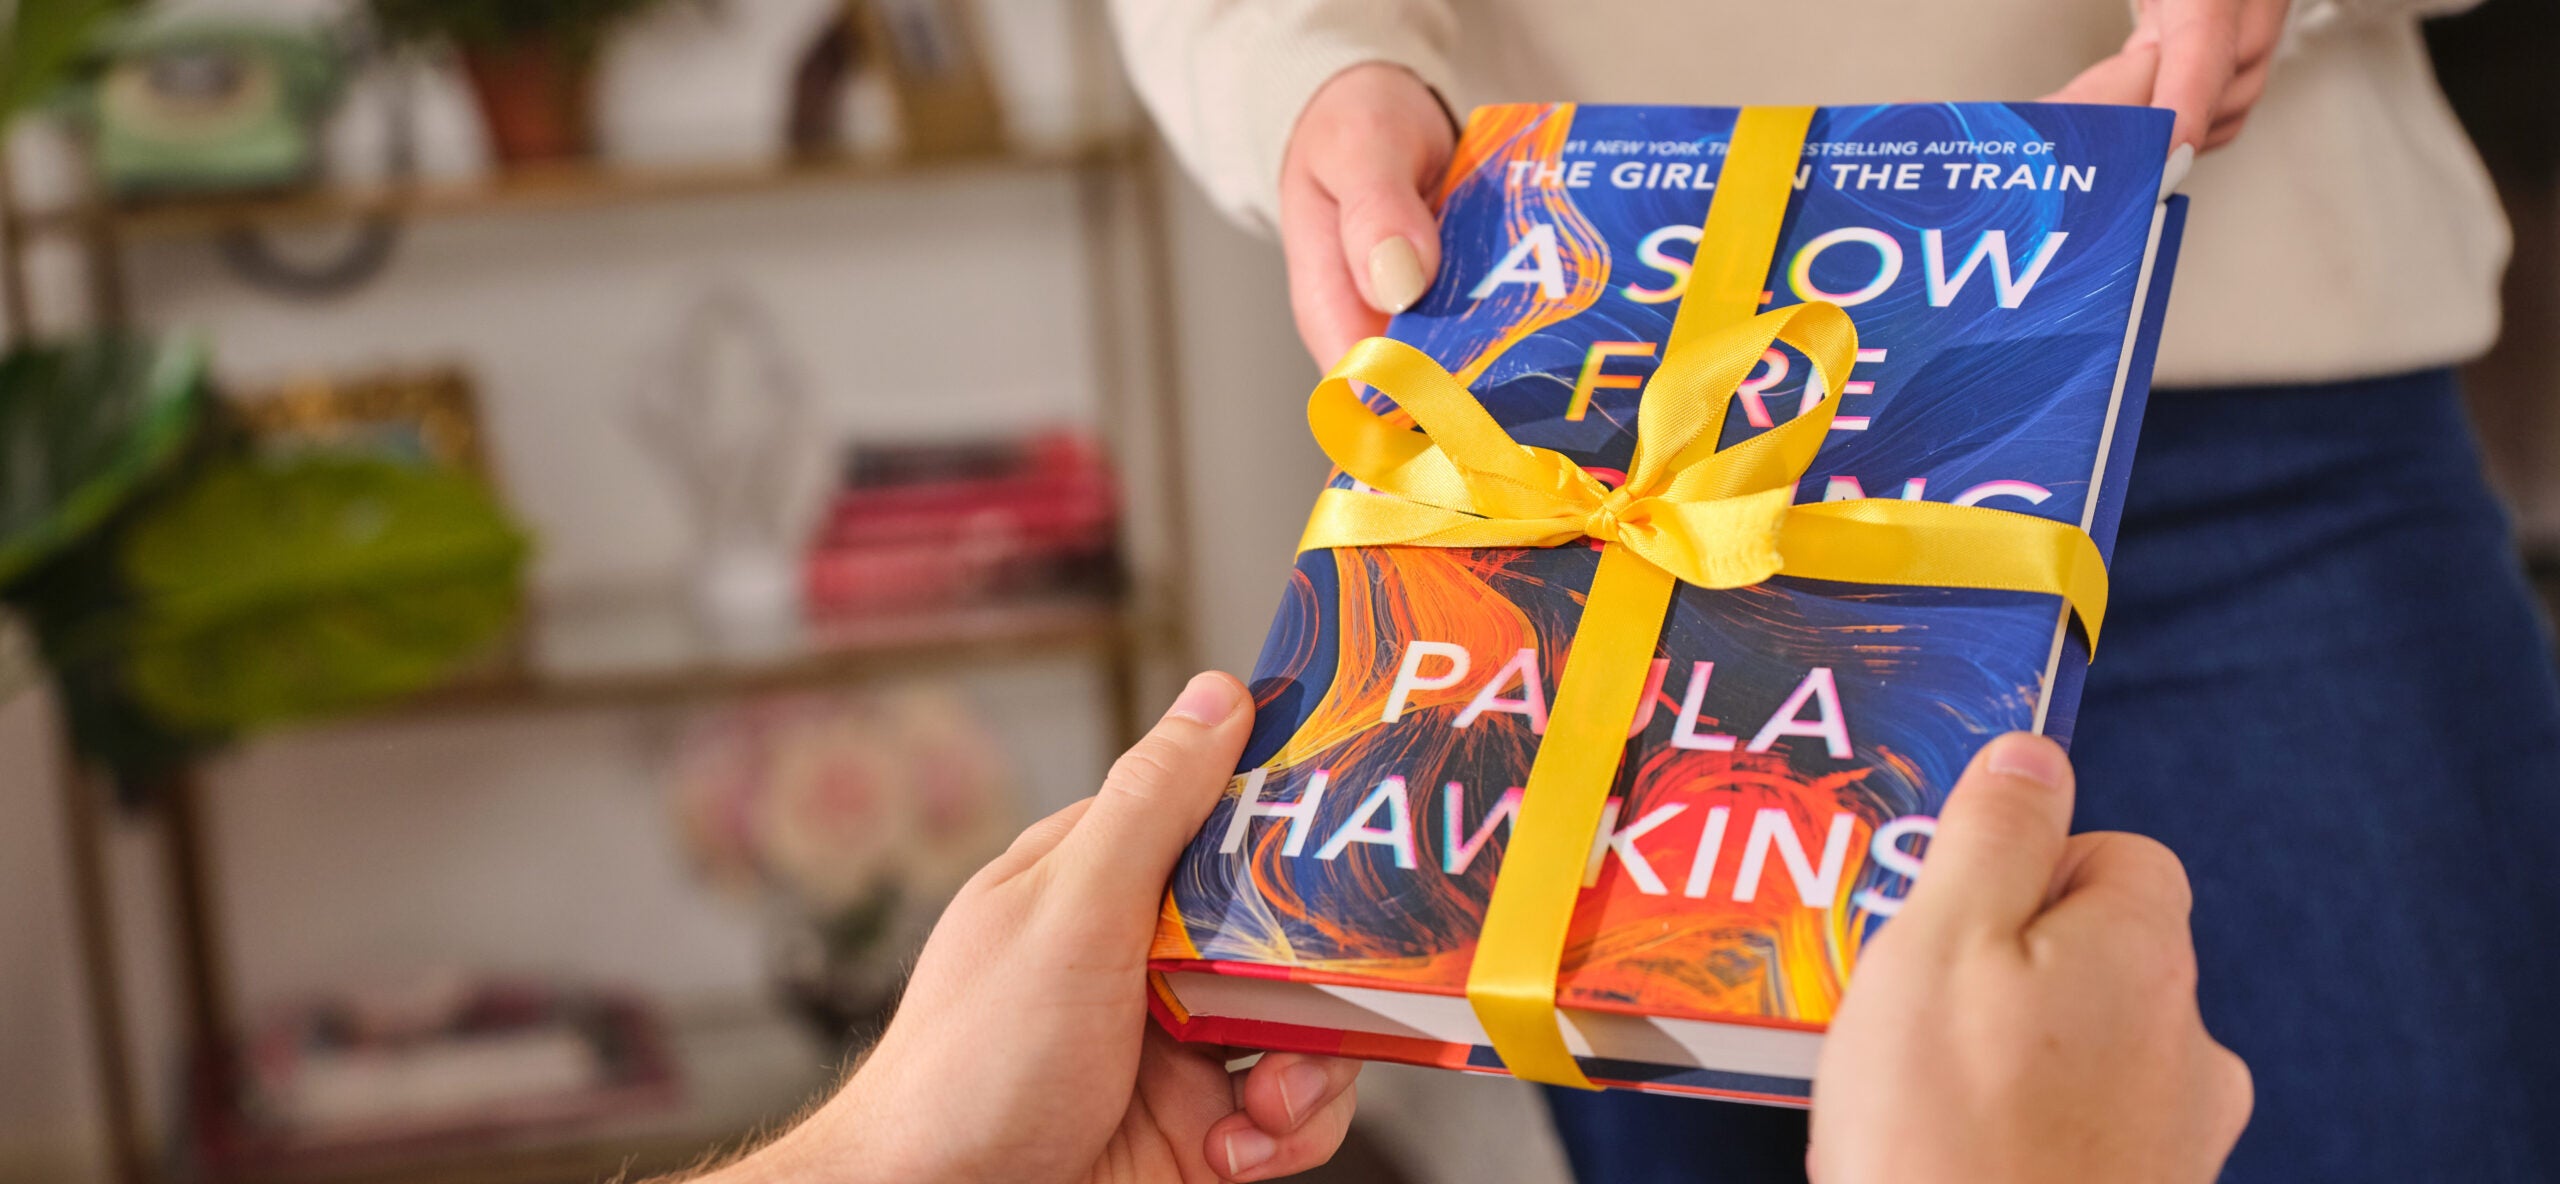 Your Holiday Gift Giving Guide is Here! The Best Fiction and Backlist